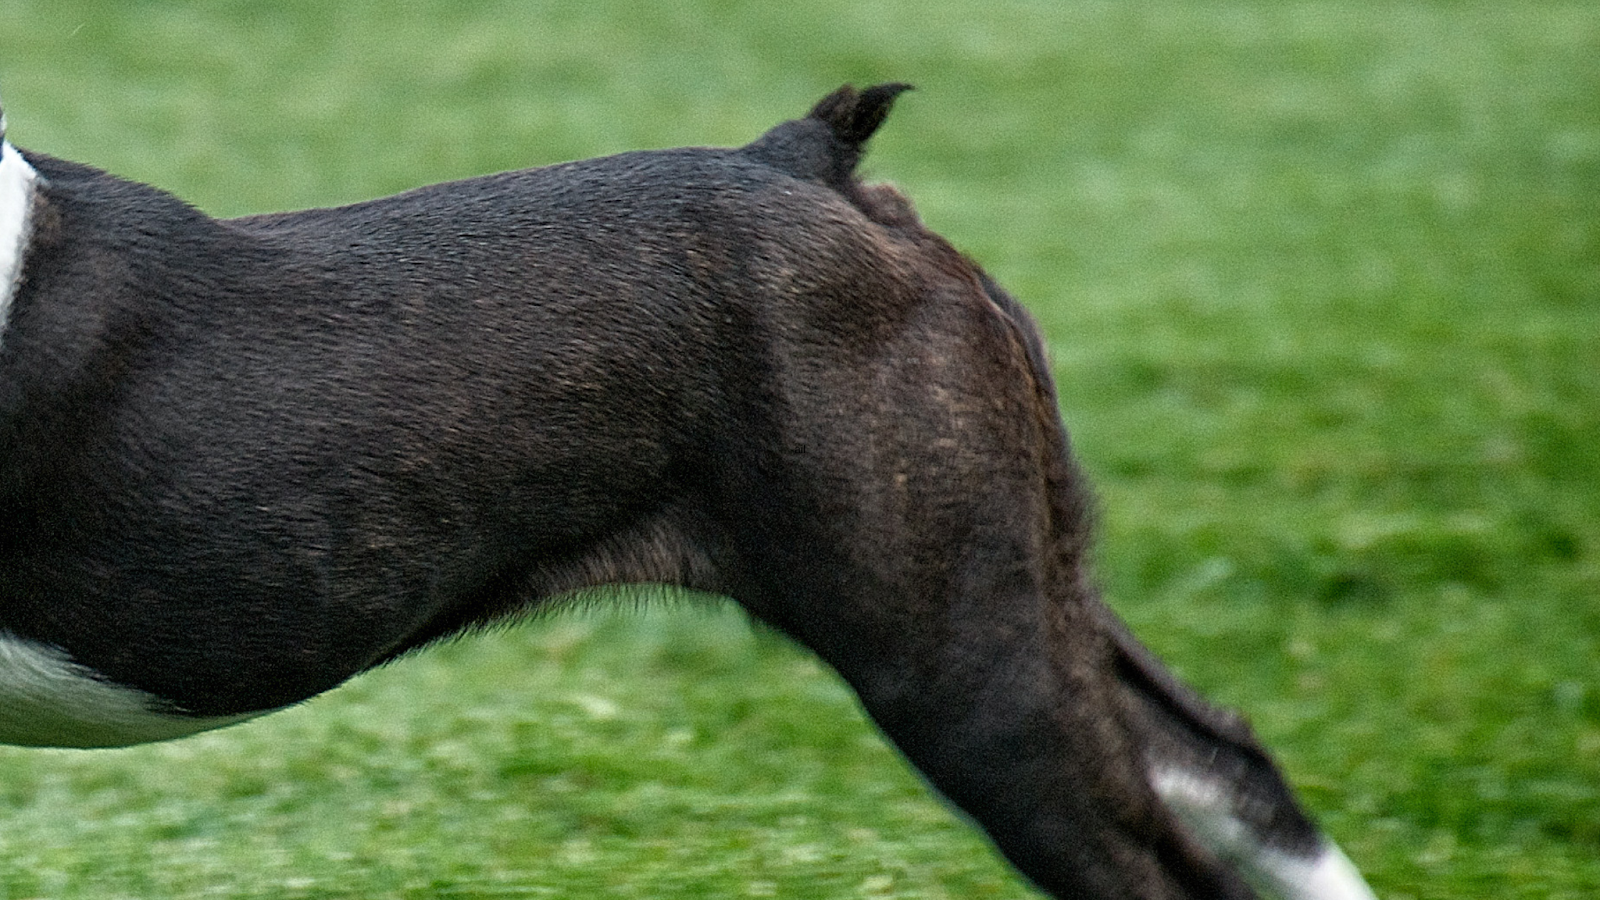 bobbed tail on a Boston Terrier